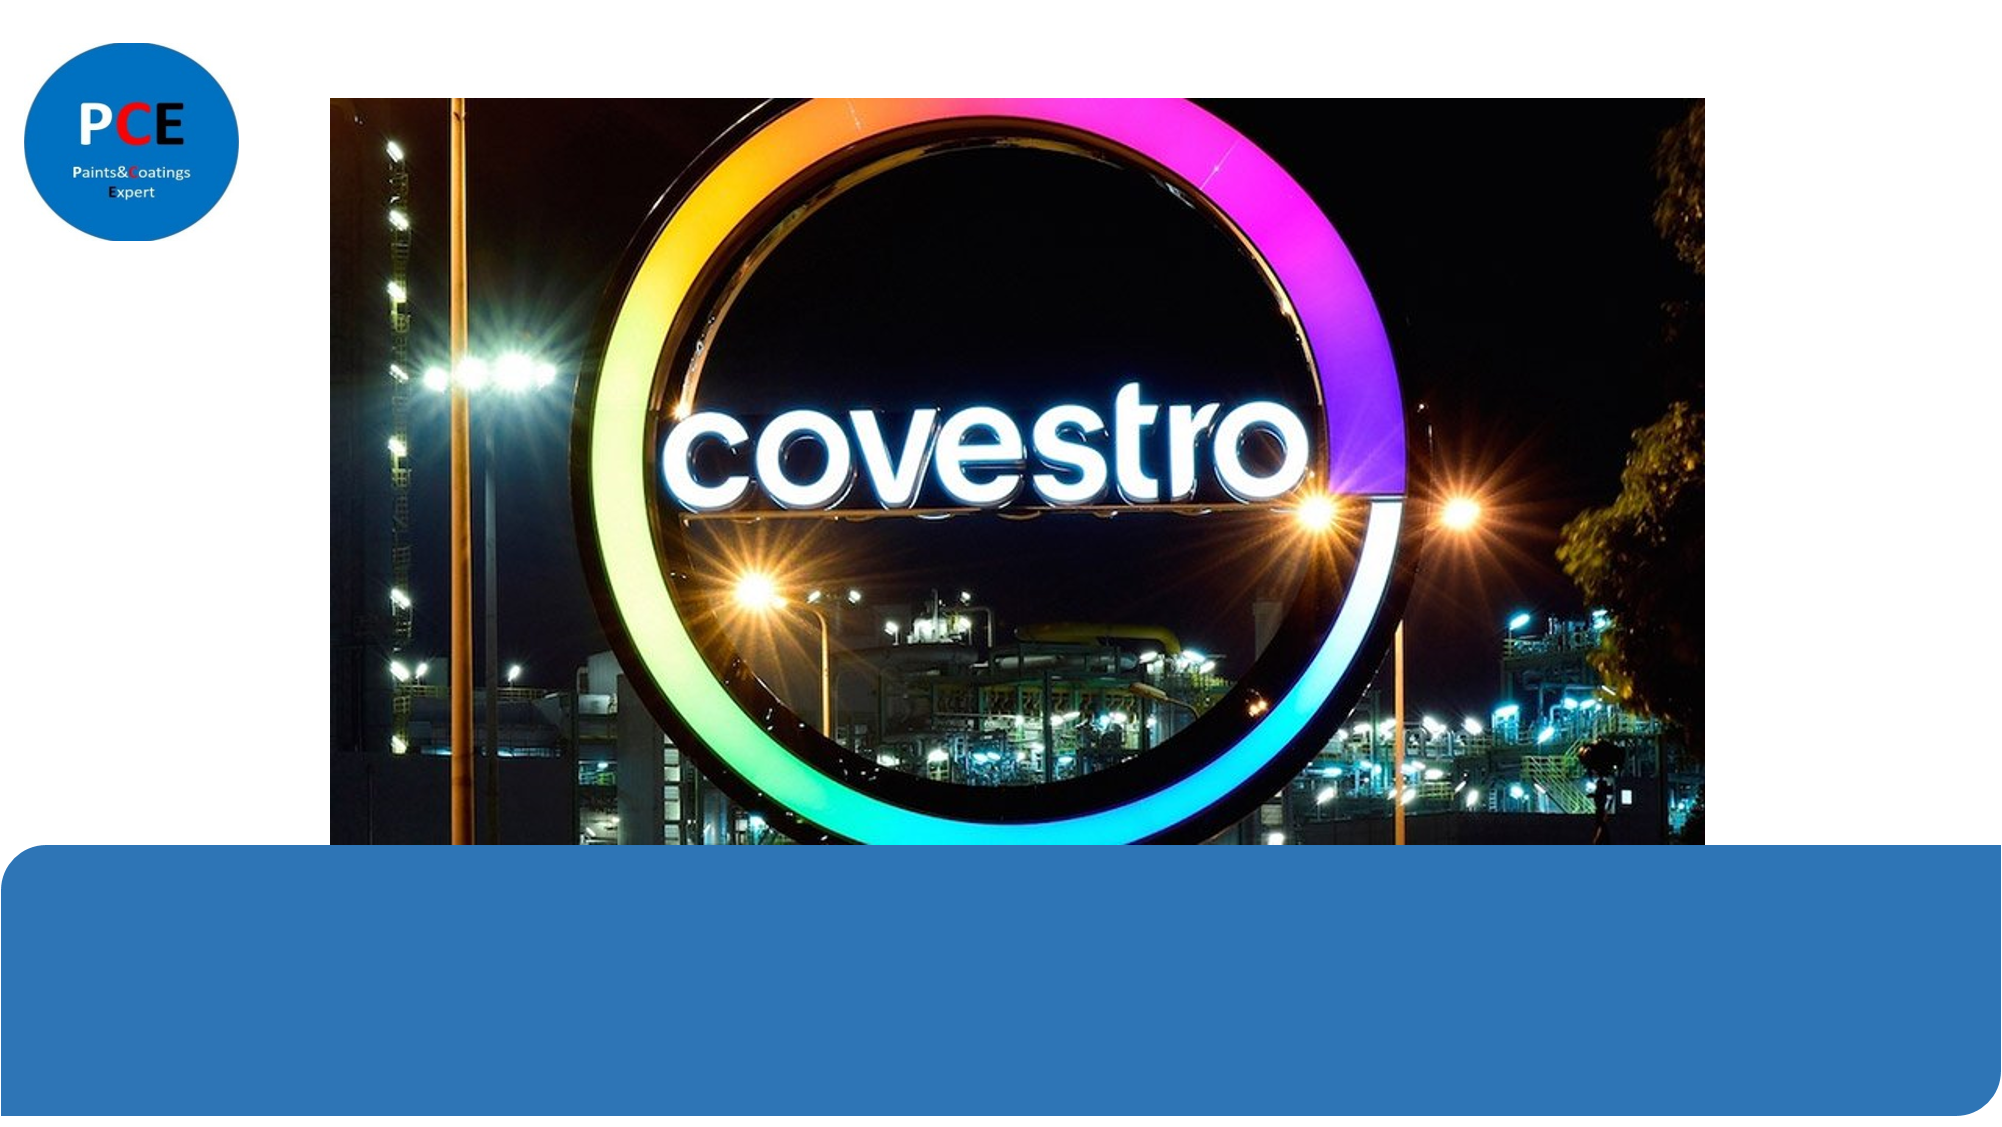 Covestro to launch total solutions approach to turbocharge performance and innovation in the decorative industry